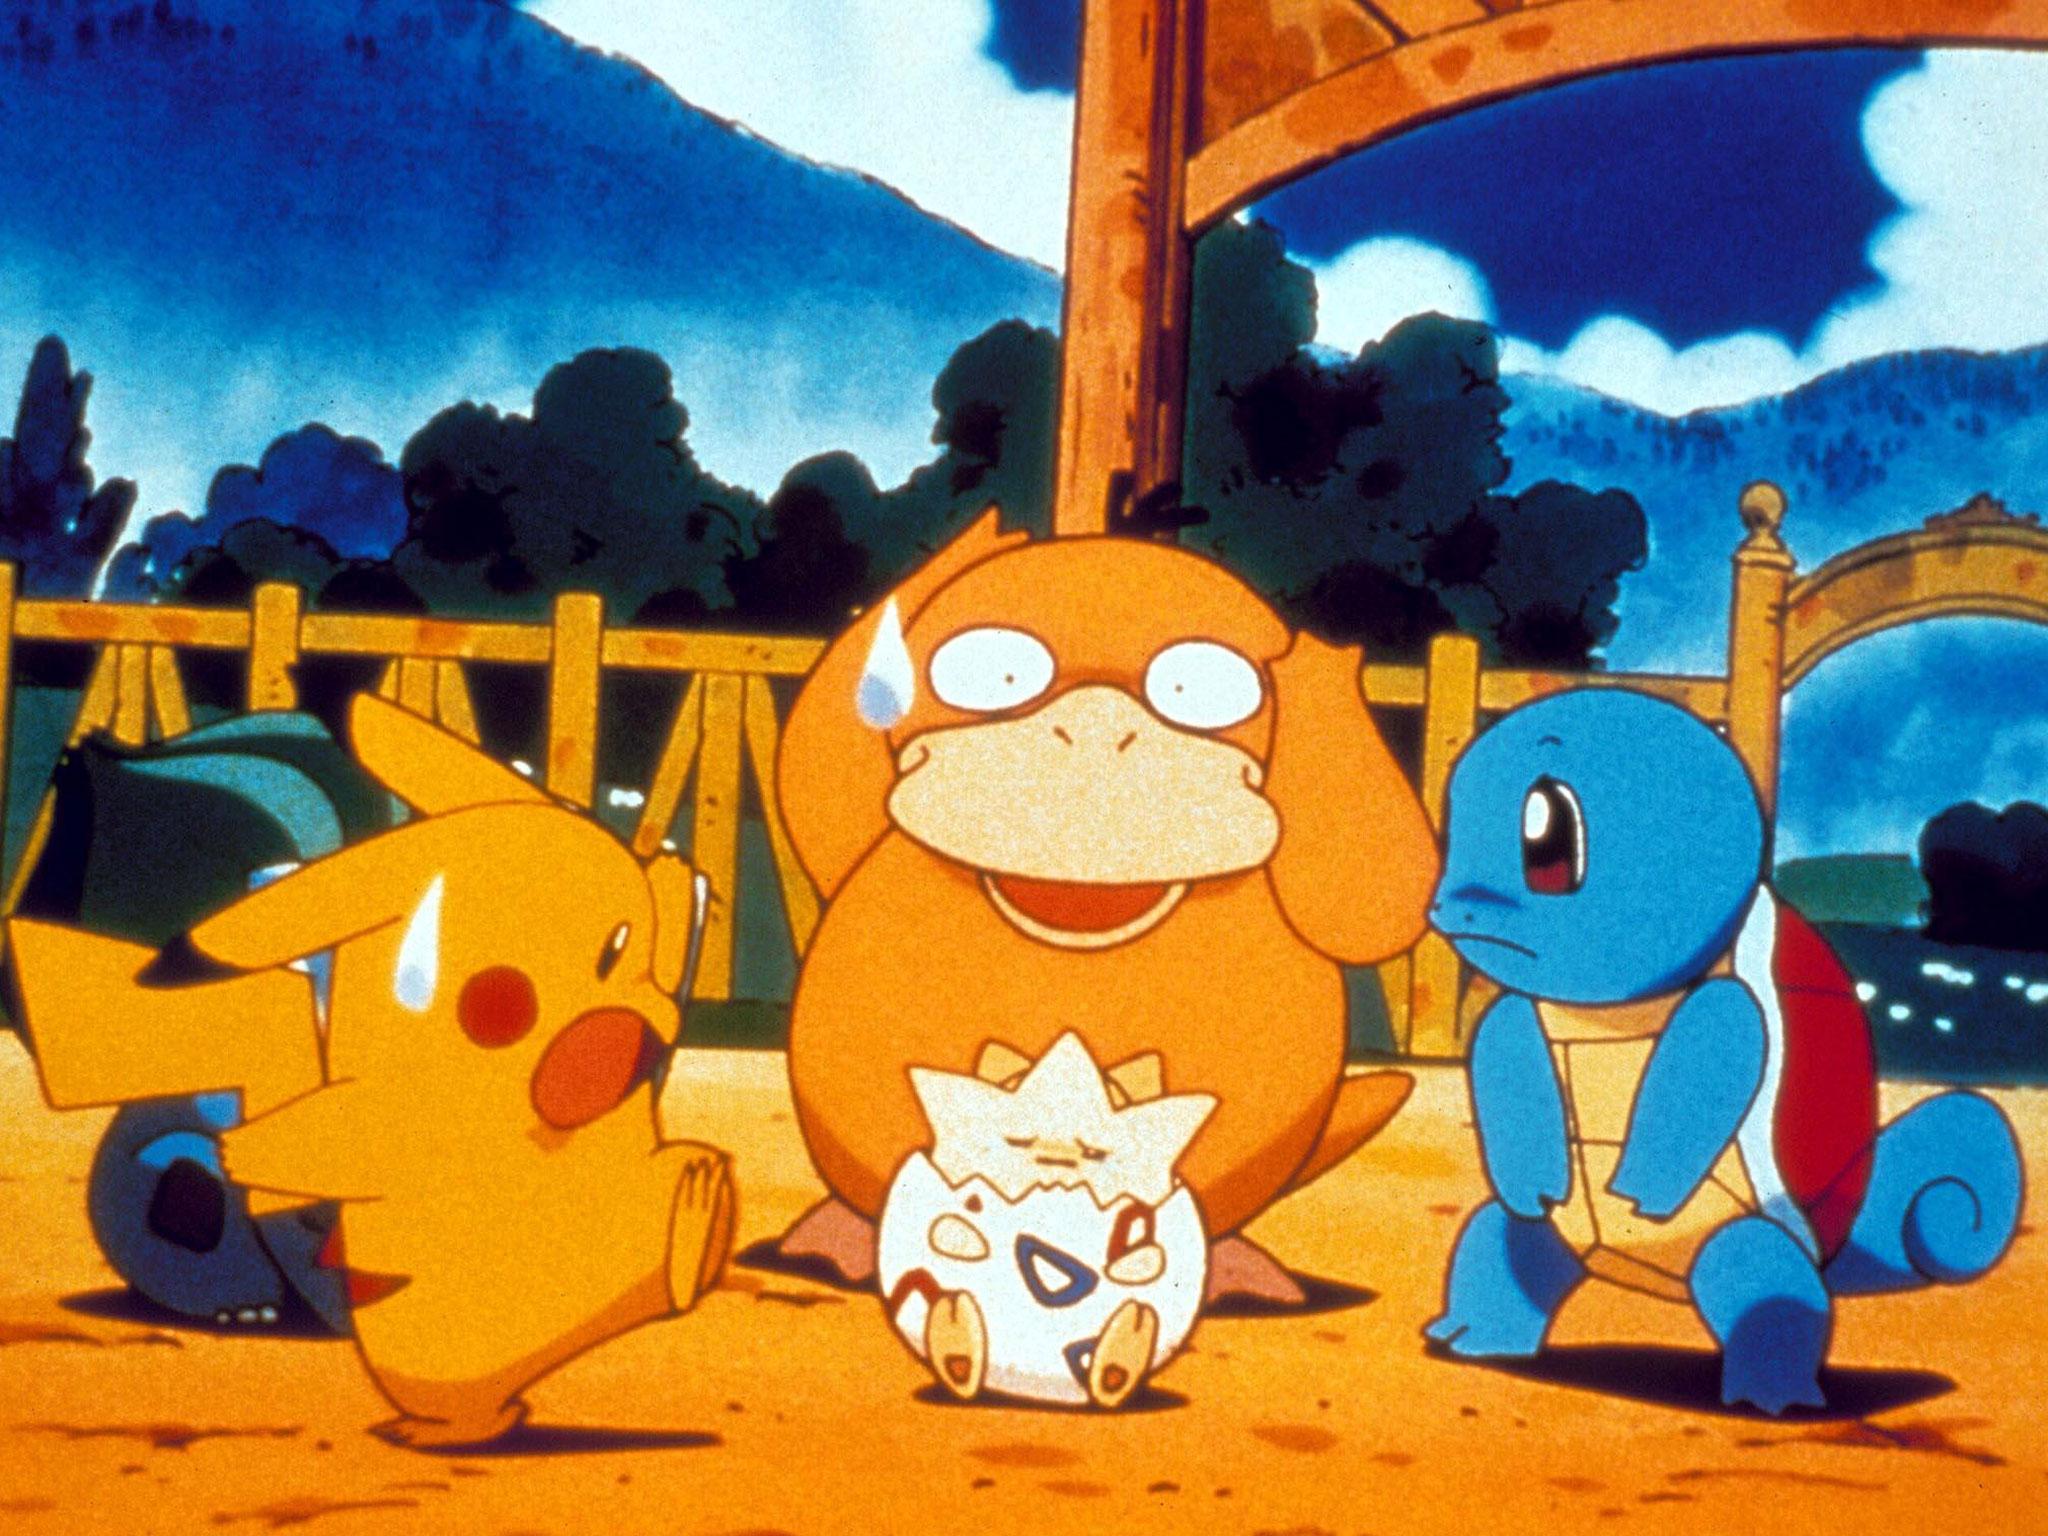 Nintendo owns a third of the Pokémon company which in turn holds the Pokémon franchise